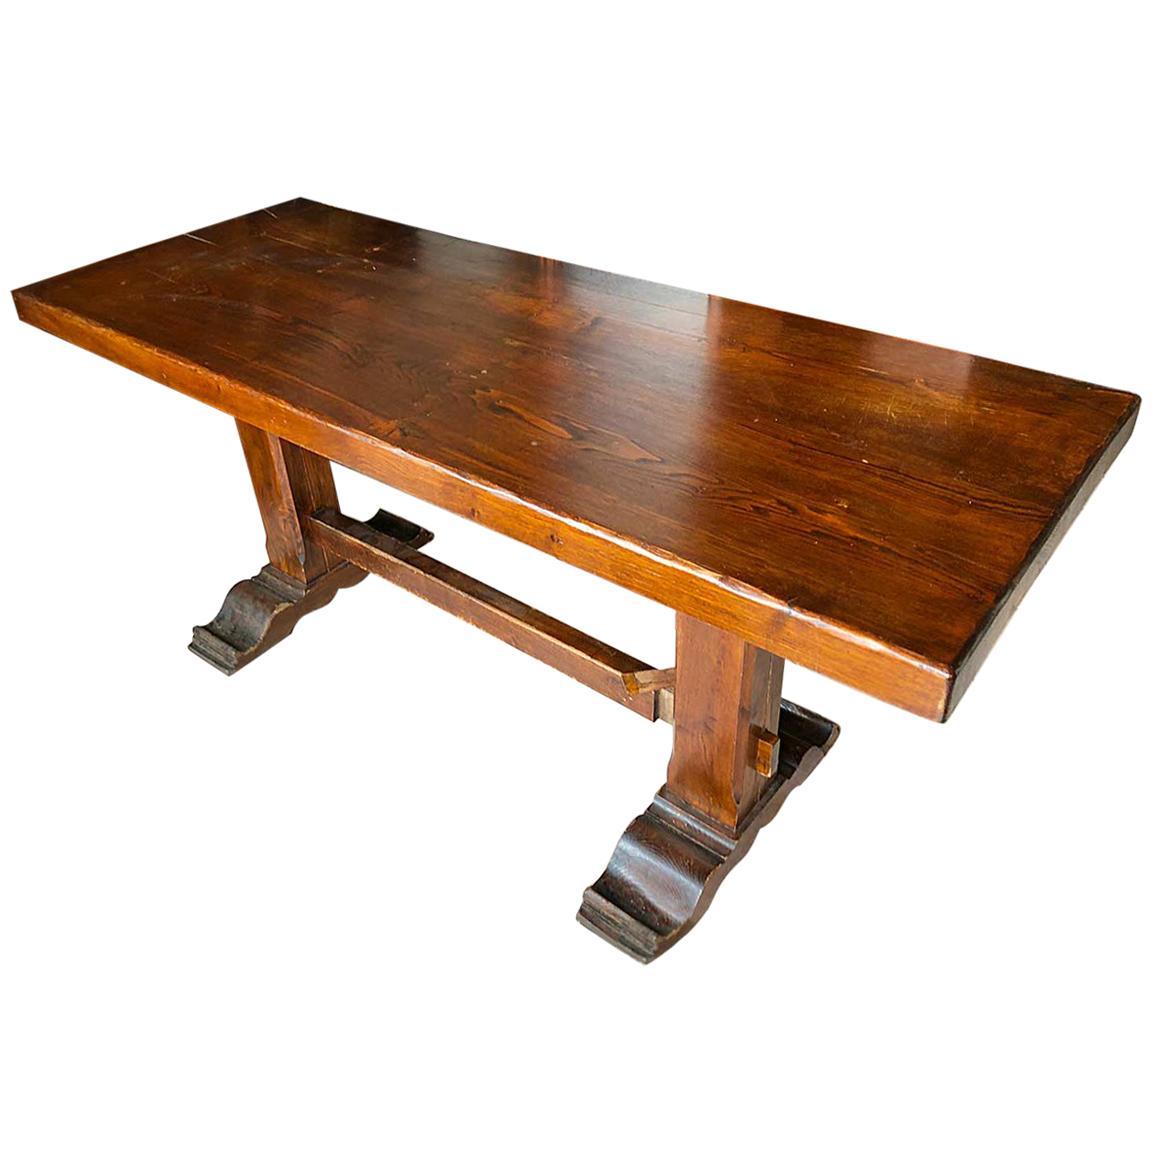 Tuscan Refectory Table in Solid Chestnut Restored Wax Polished, 1960s